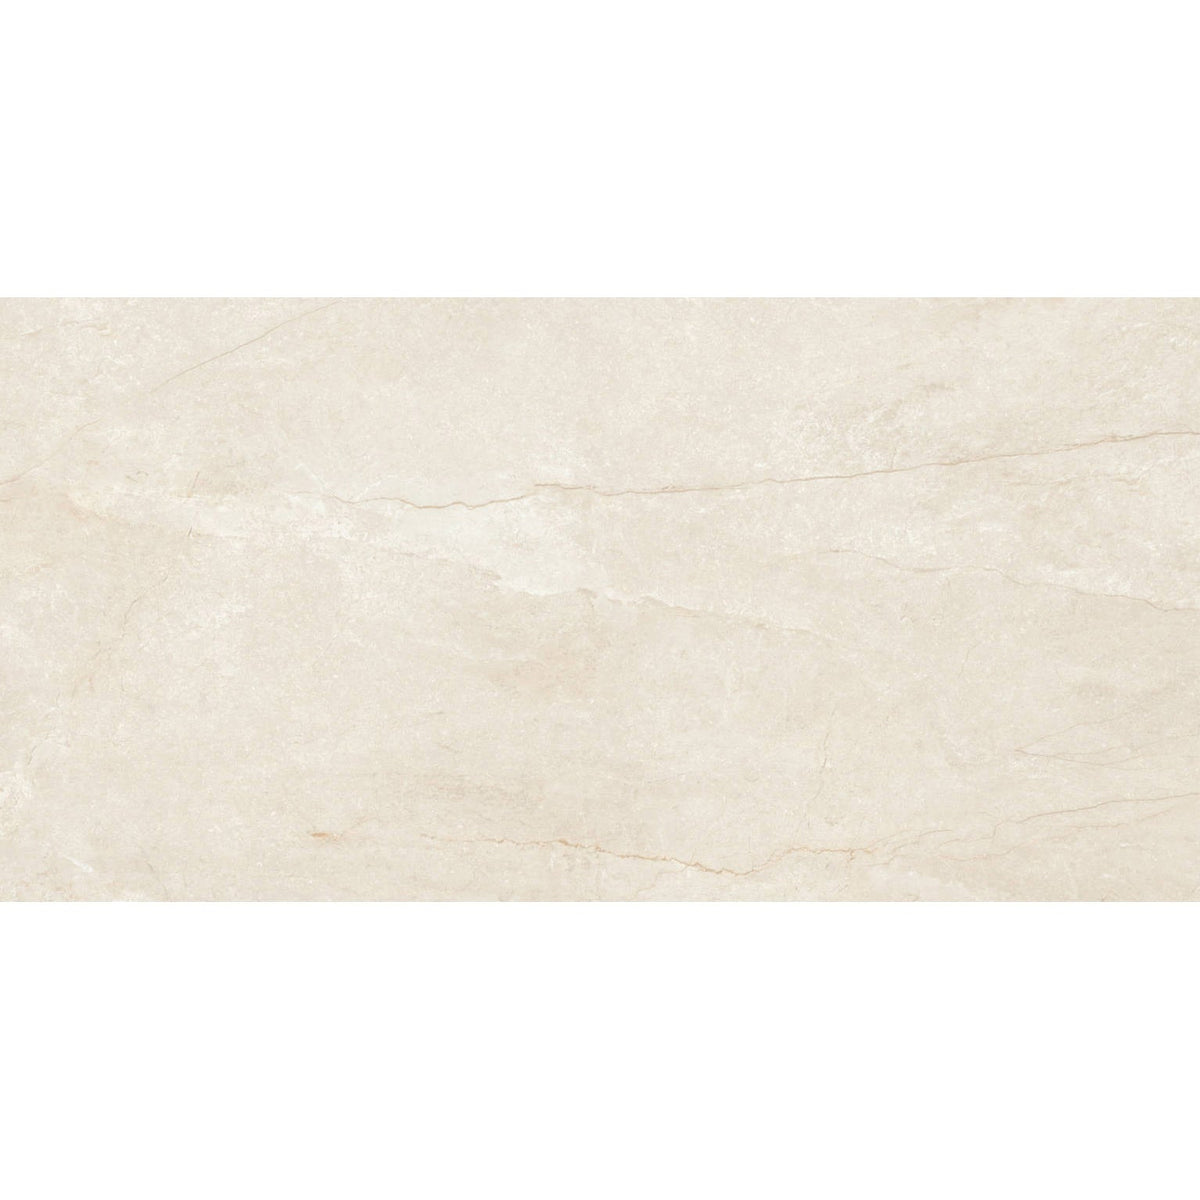 General Ceramic - Wells 12 in. x 24 in. Rectified Porcelain Tile - Ivory Matte